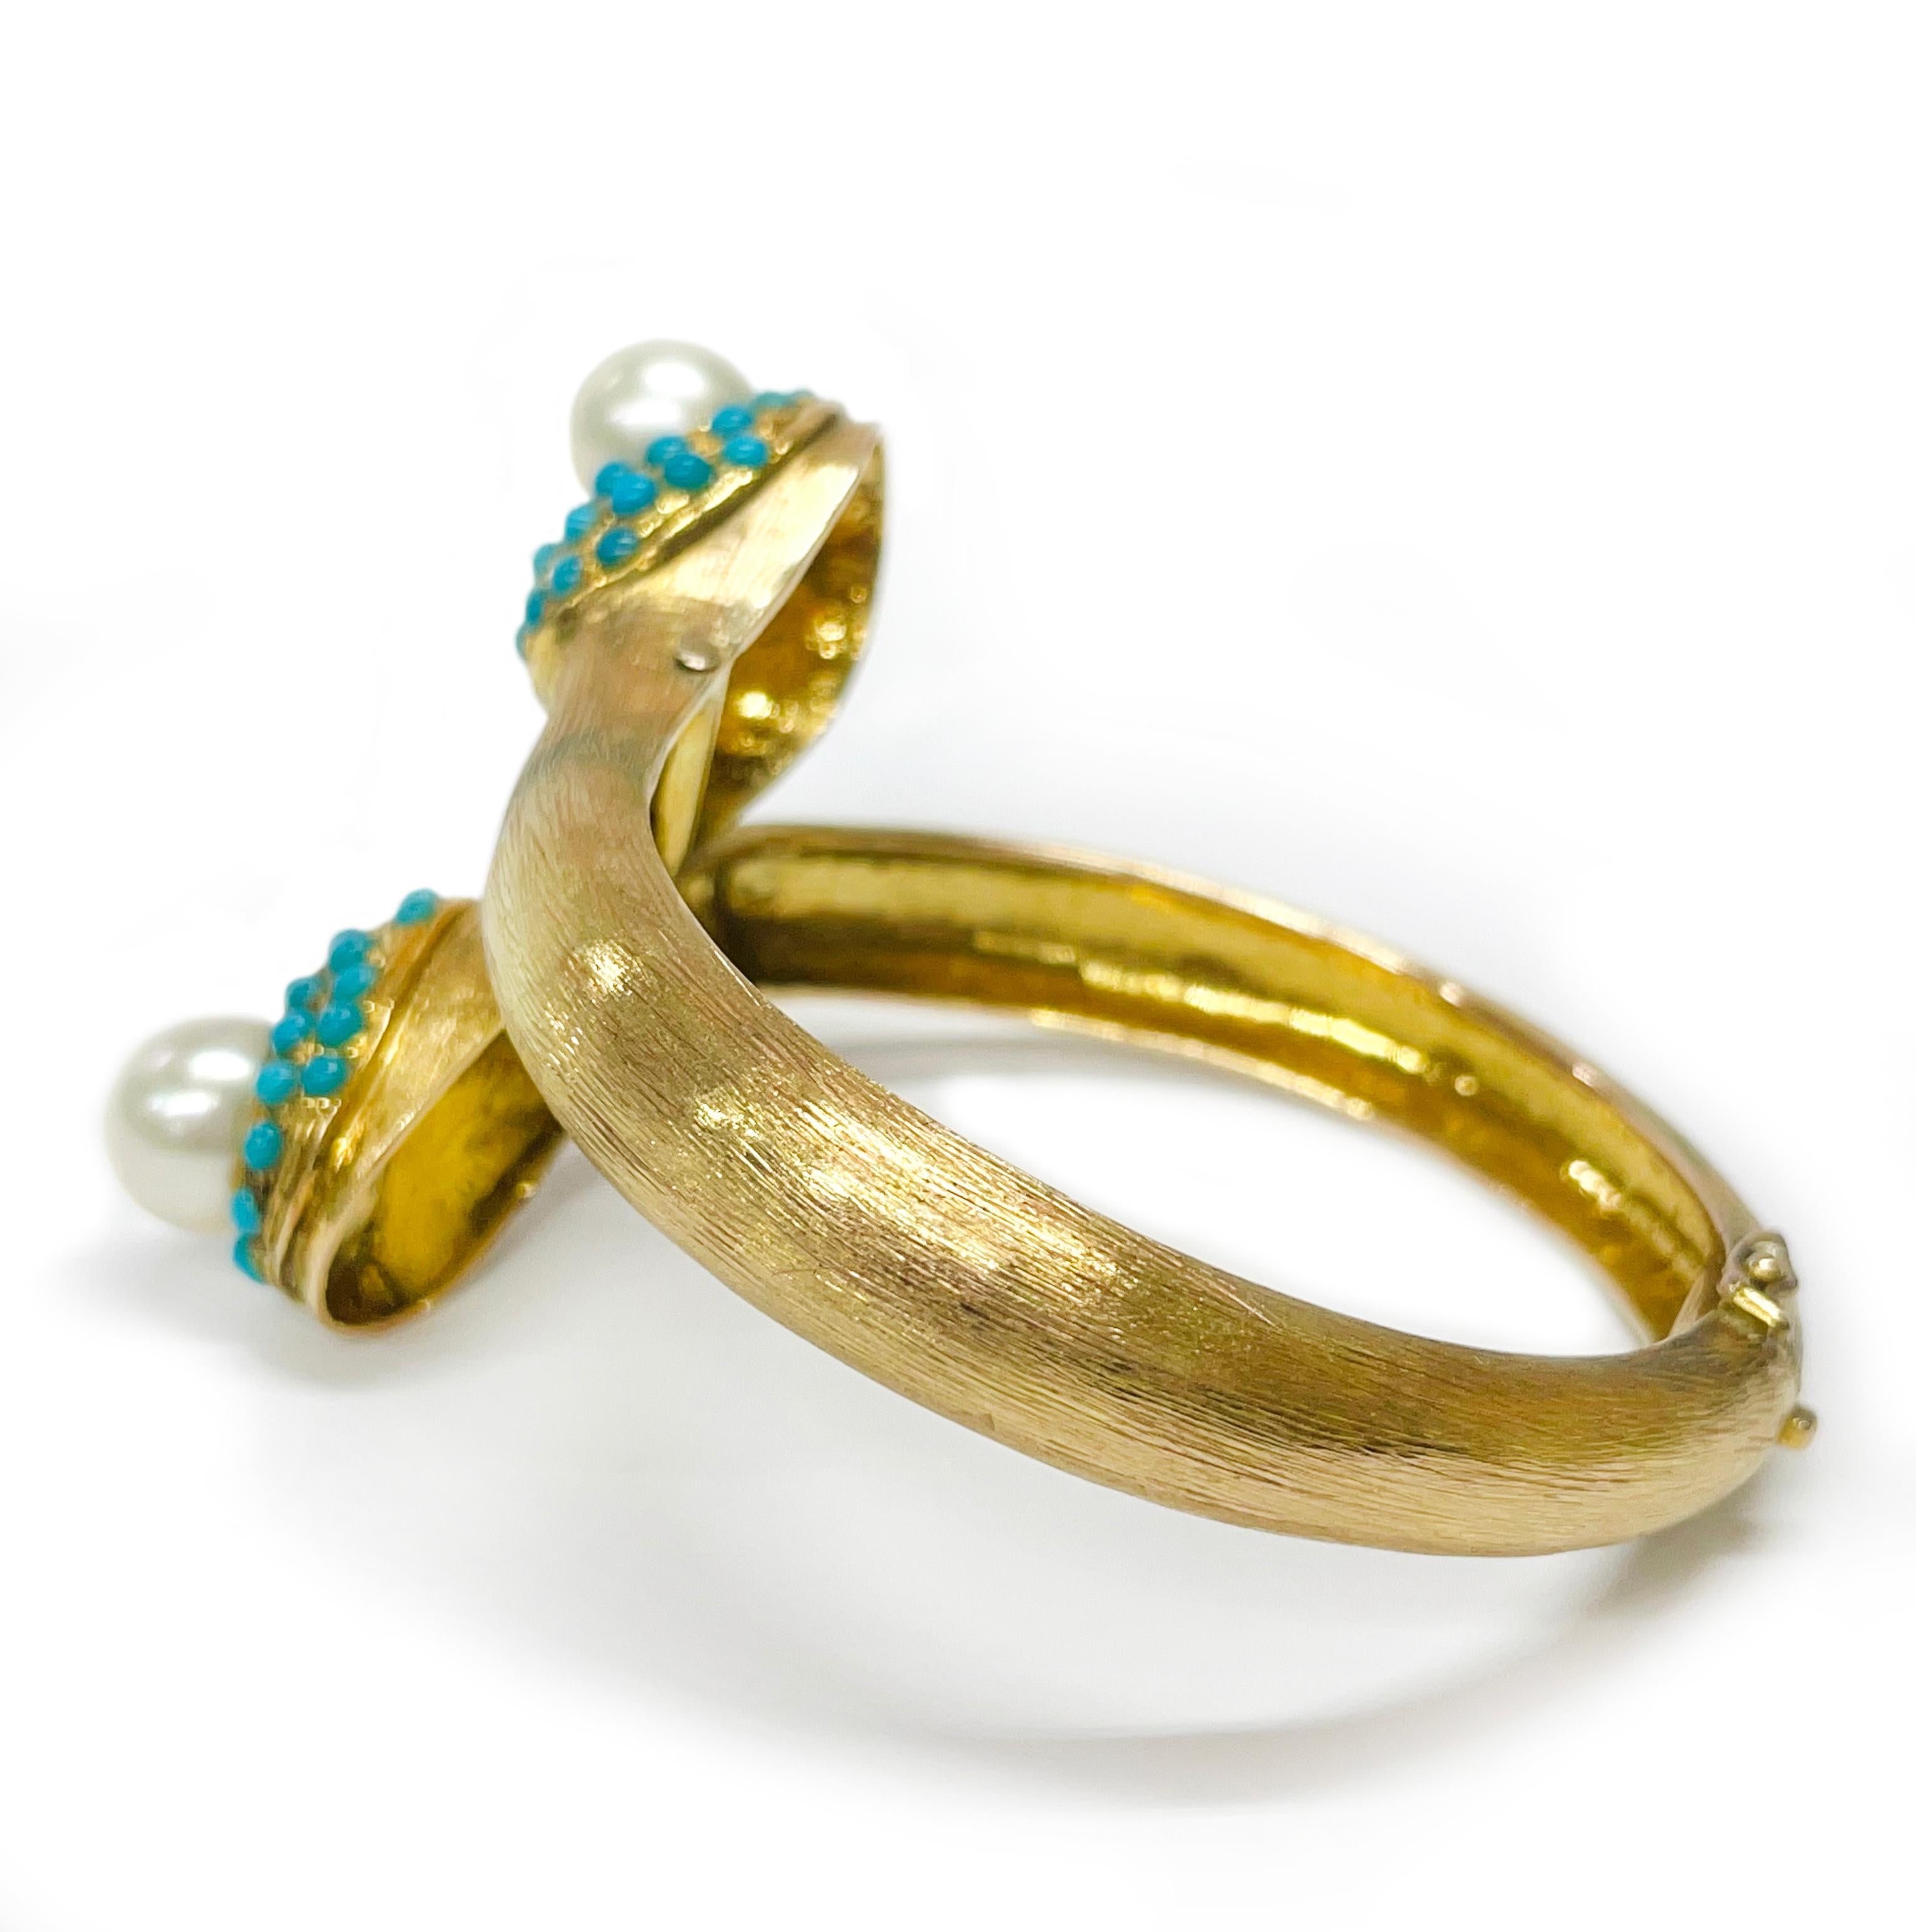 14 Karat Yellow Gold Pearl Turquoise Cuff. The bracelet cuff features two 9.5mm South Sea Pearls and sixty-six 2.5mm Turquoise cabochons on the ends of the cuff. The cuff has a brushed texture on the front side and smooth finish on the inside with a